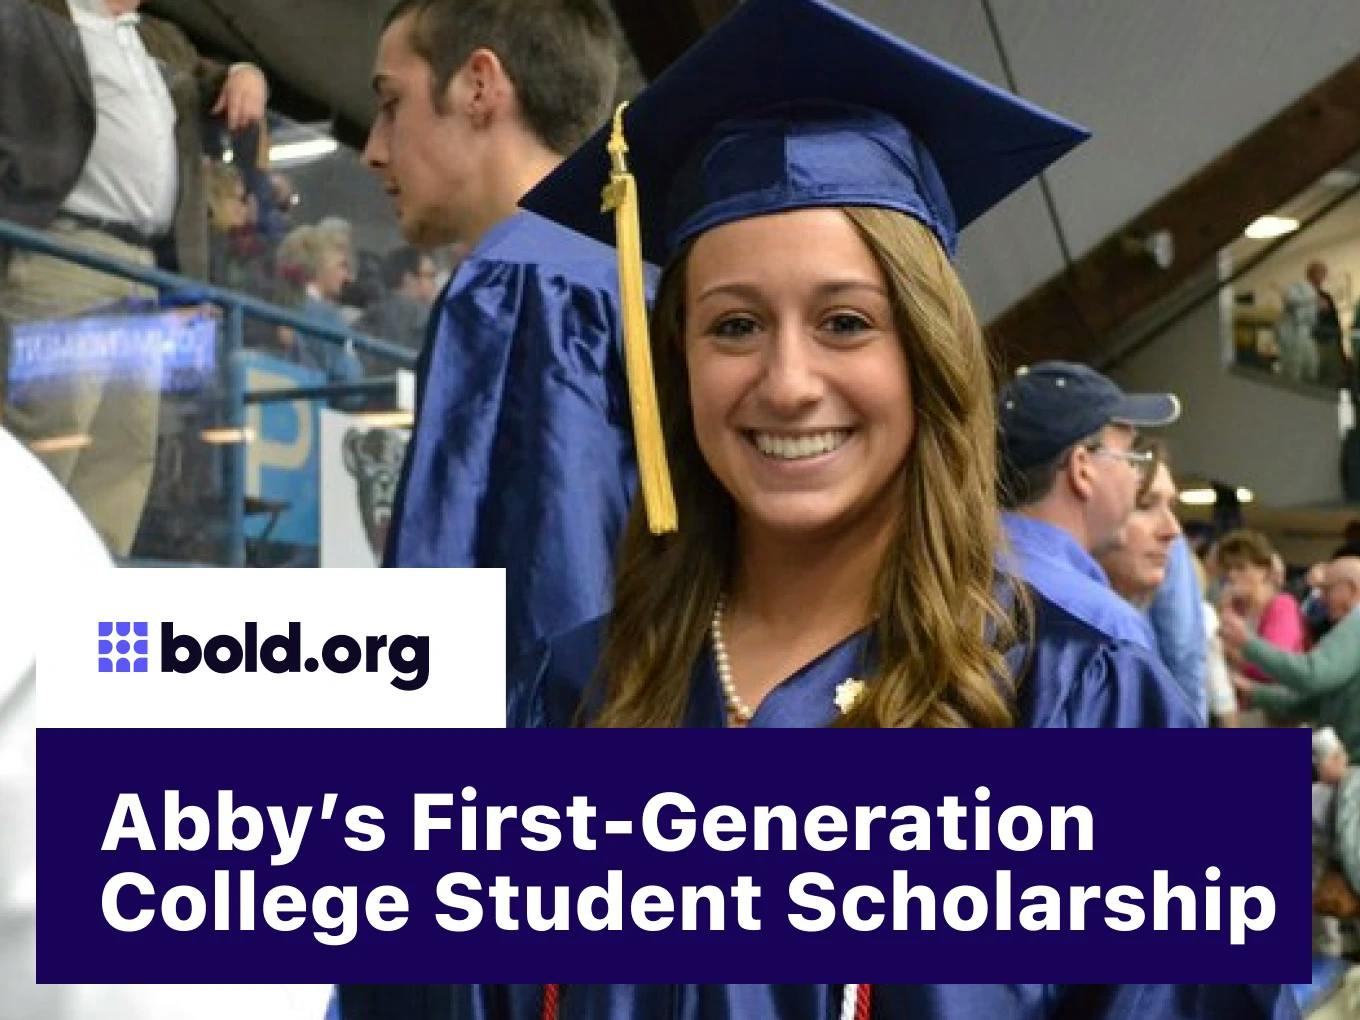 Abby's First-Generation College Student Scholarship